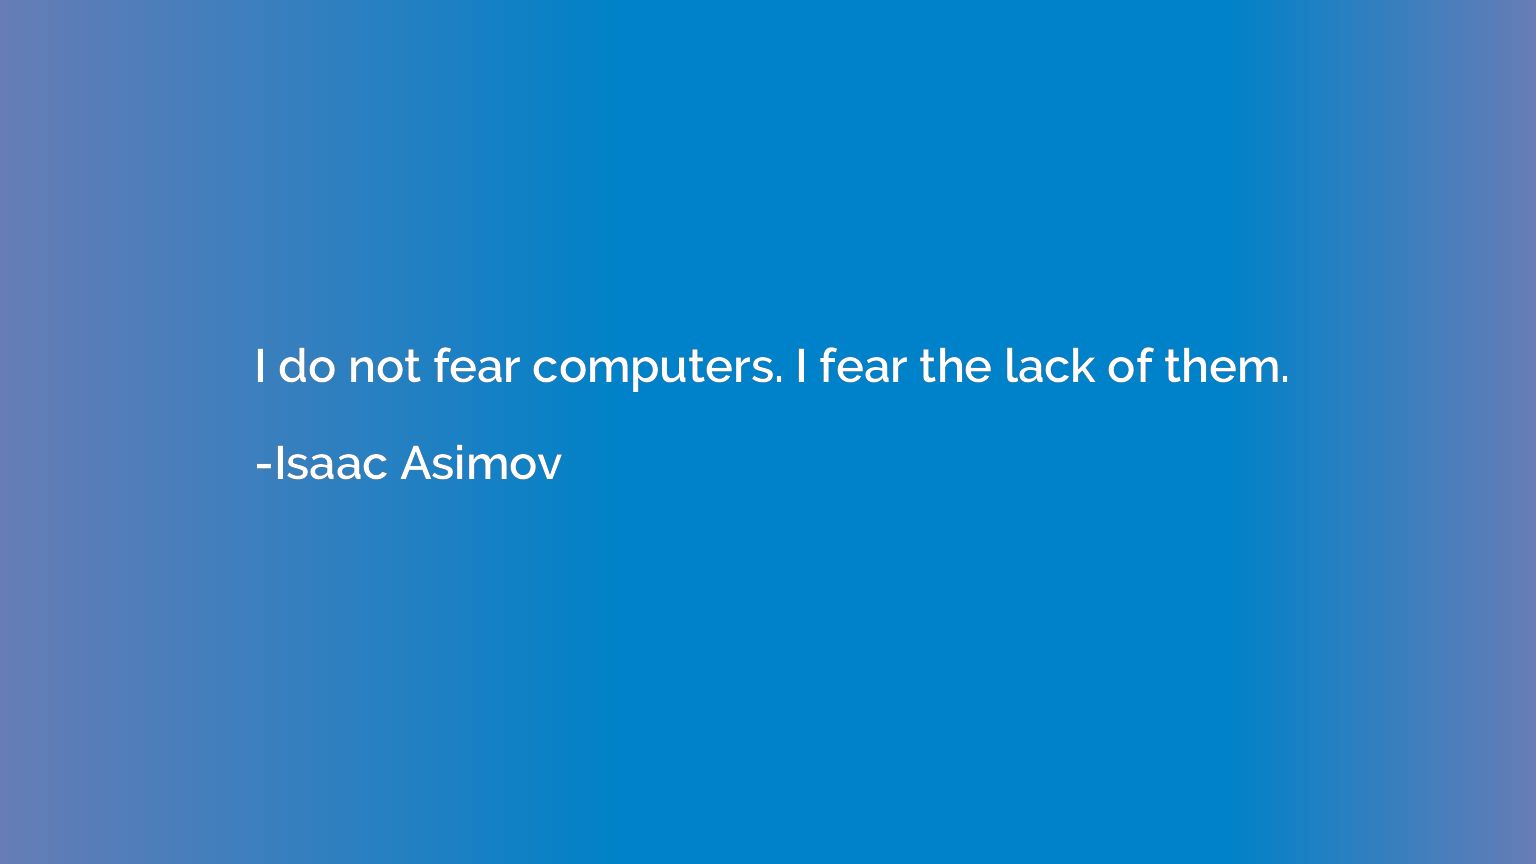 I do not fear computers. I fear the lack of them.